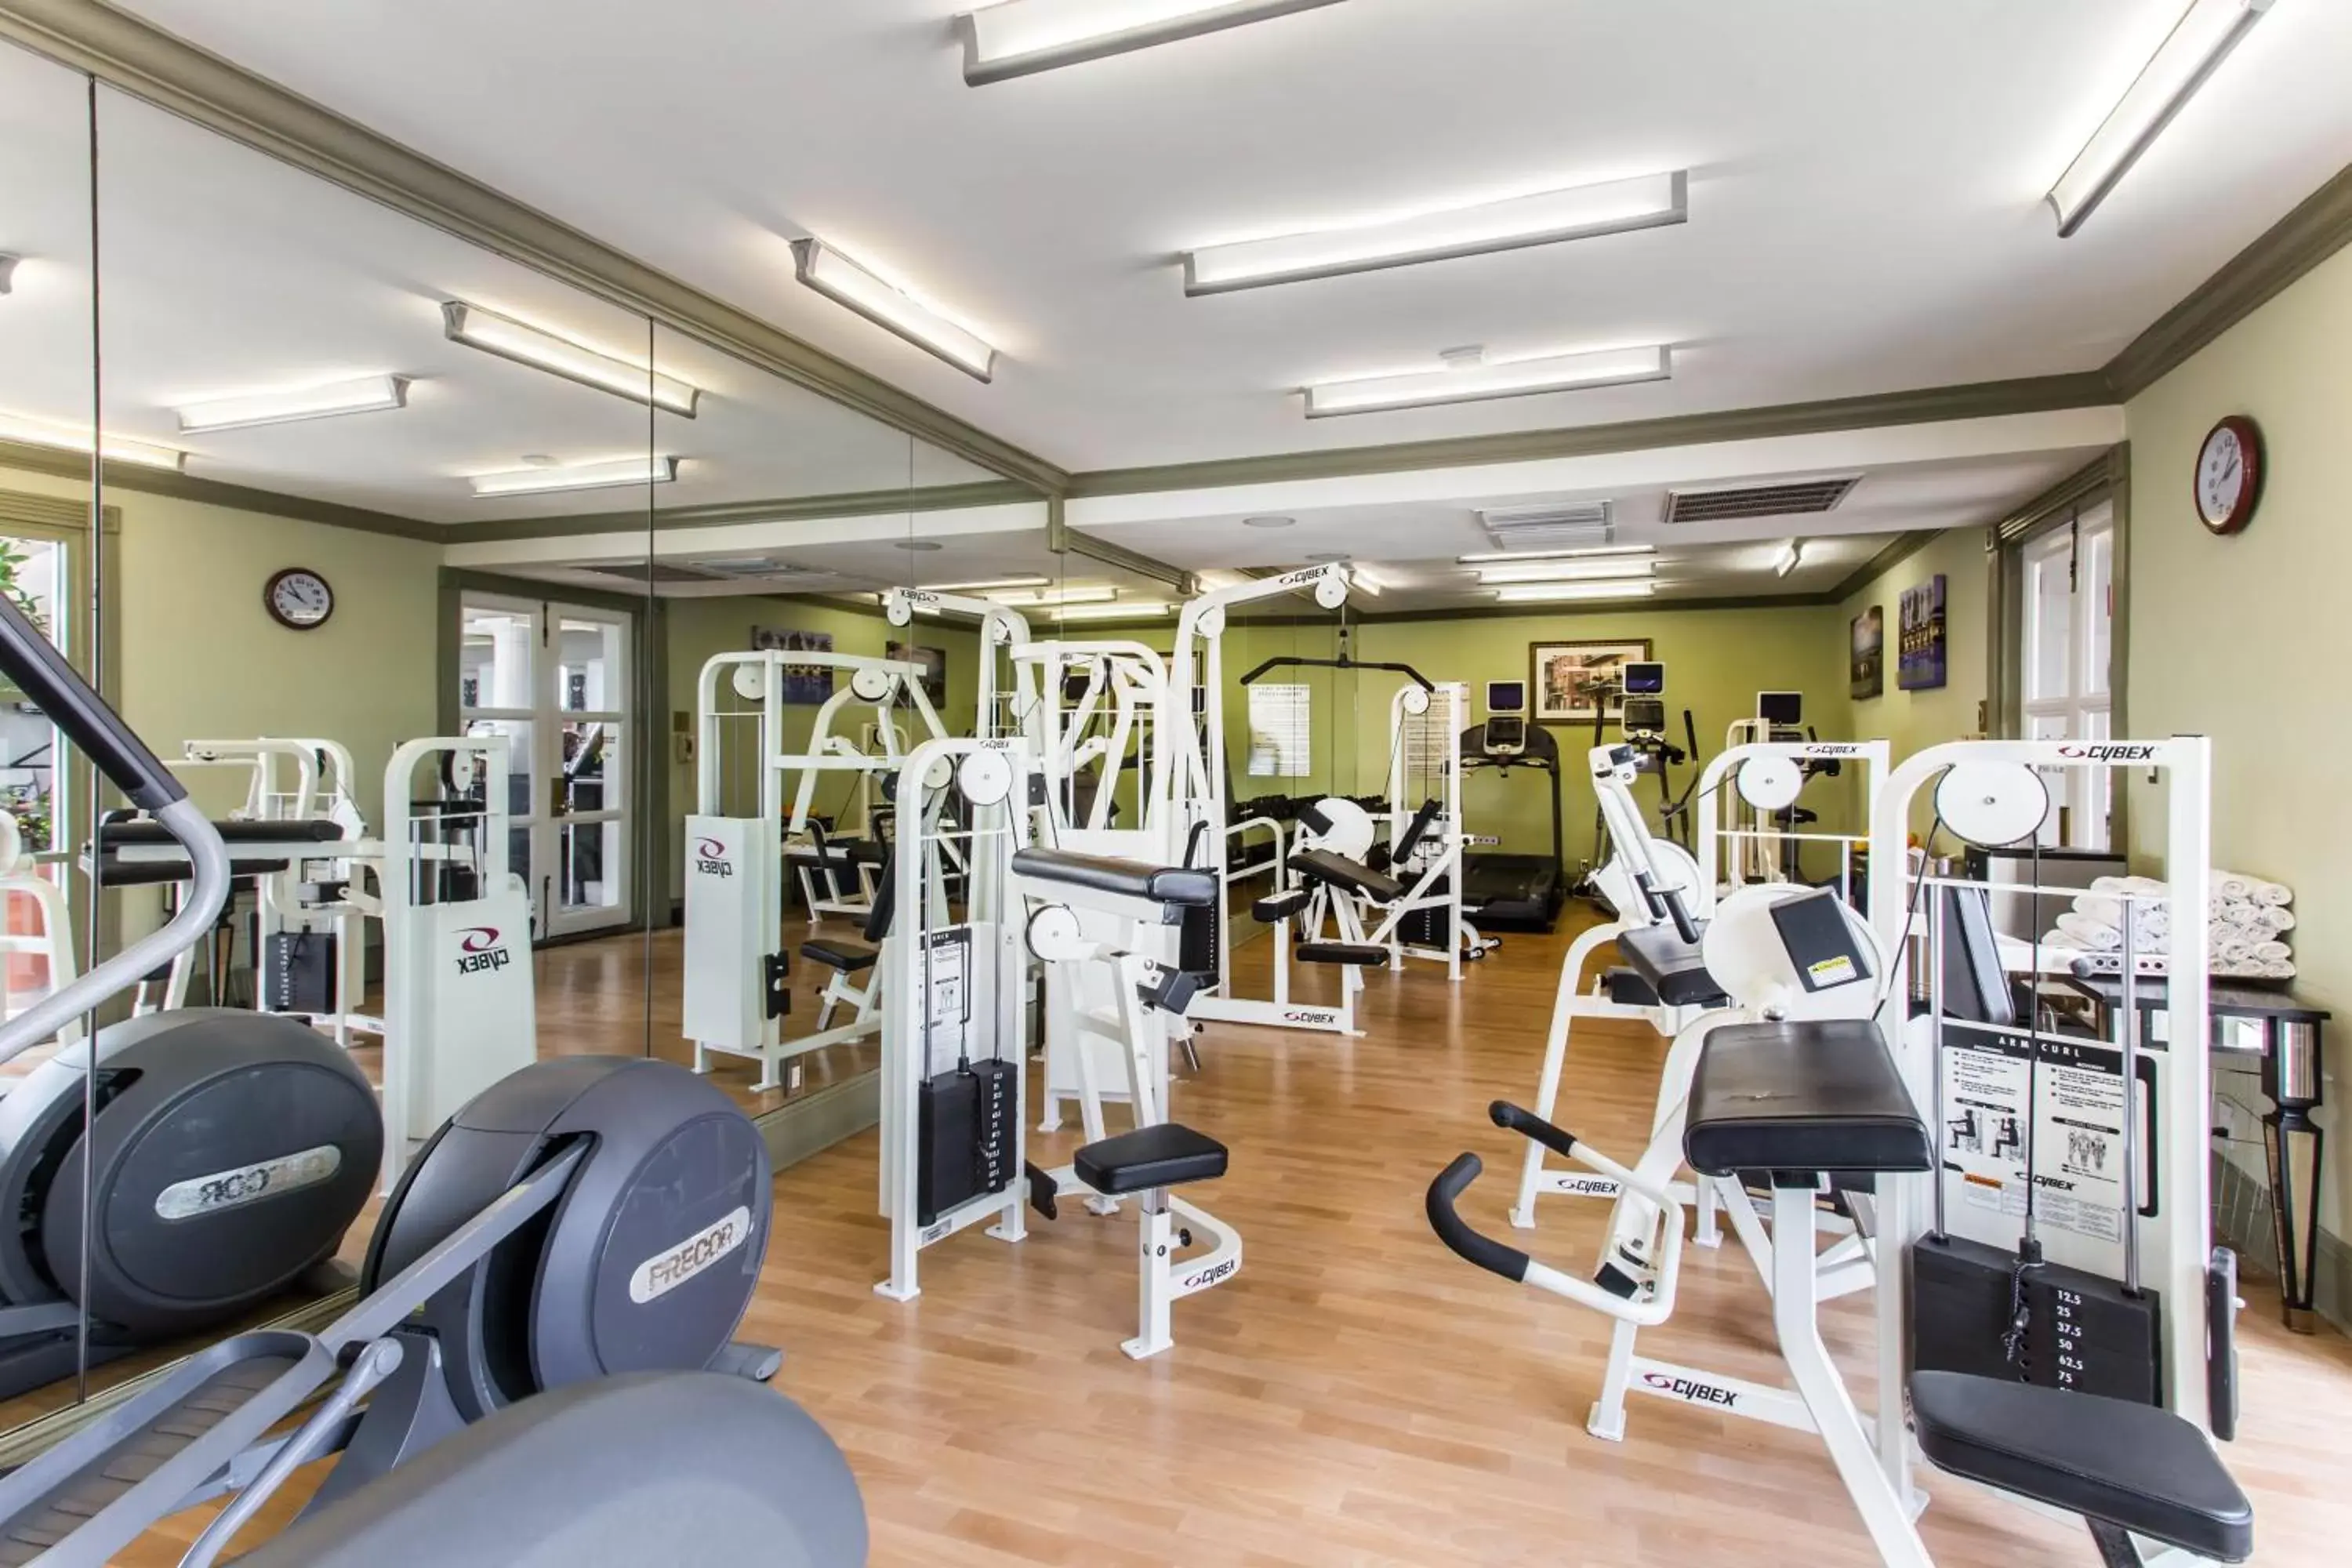 Fitness centre/facilities, Fitness Center/Facilities in Omni Royal Orleans Hotel